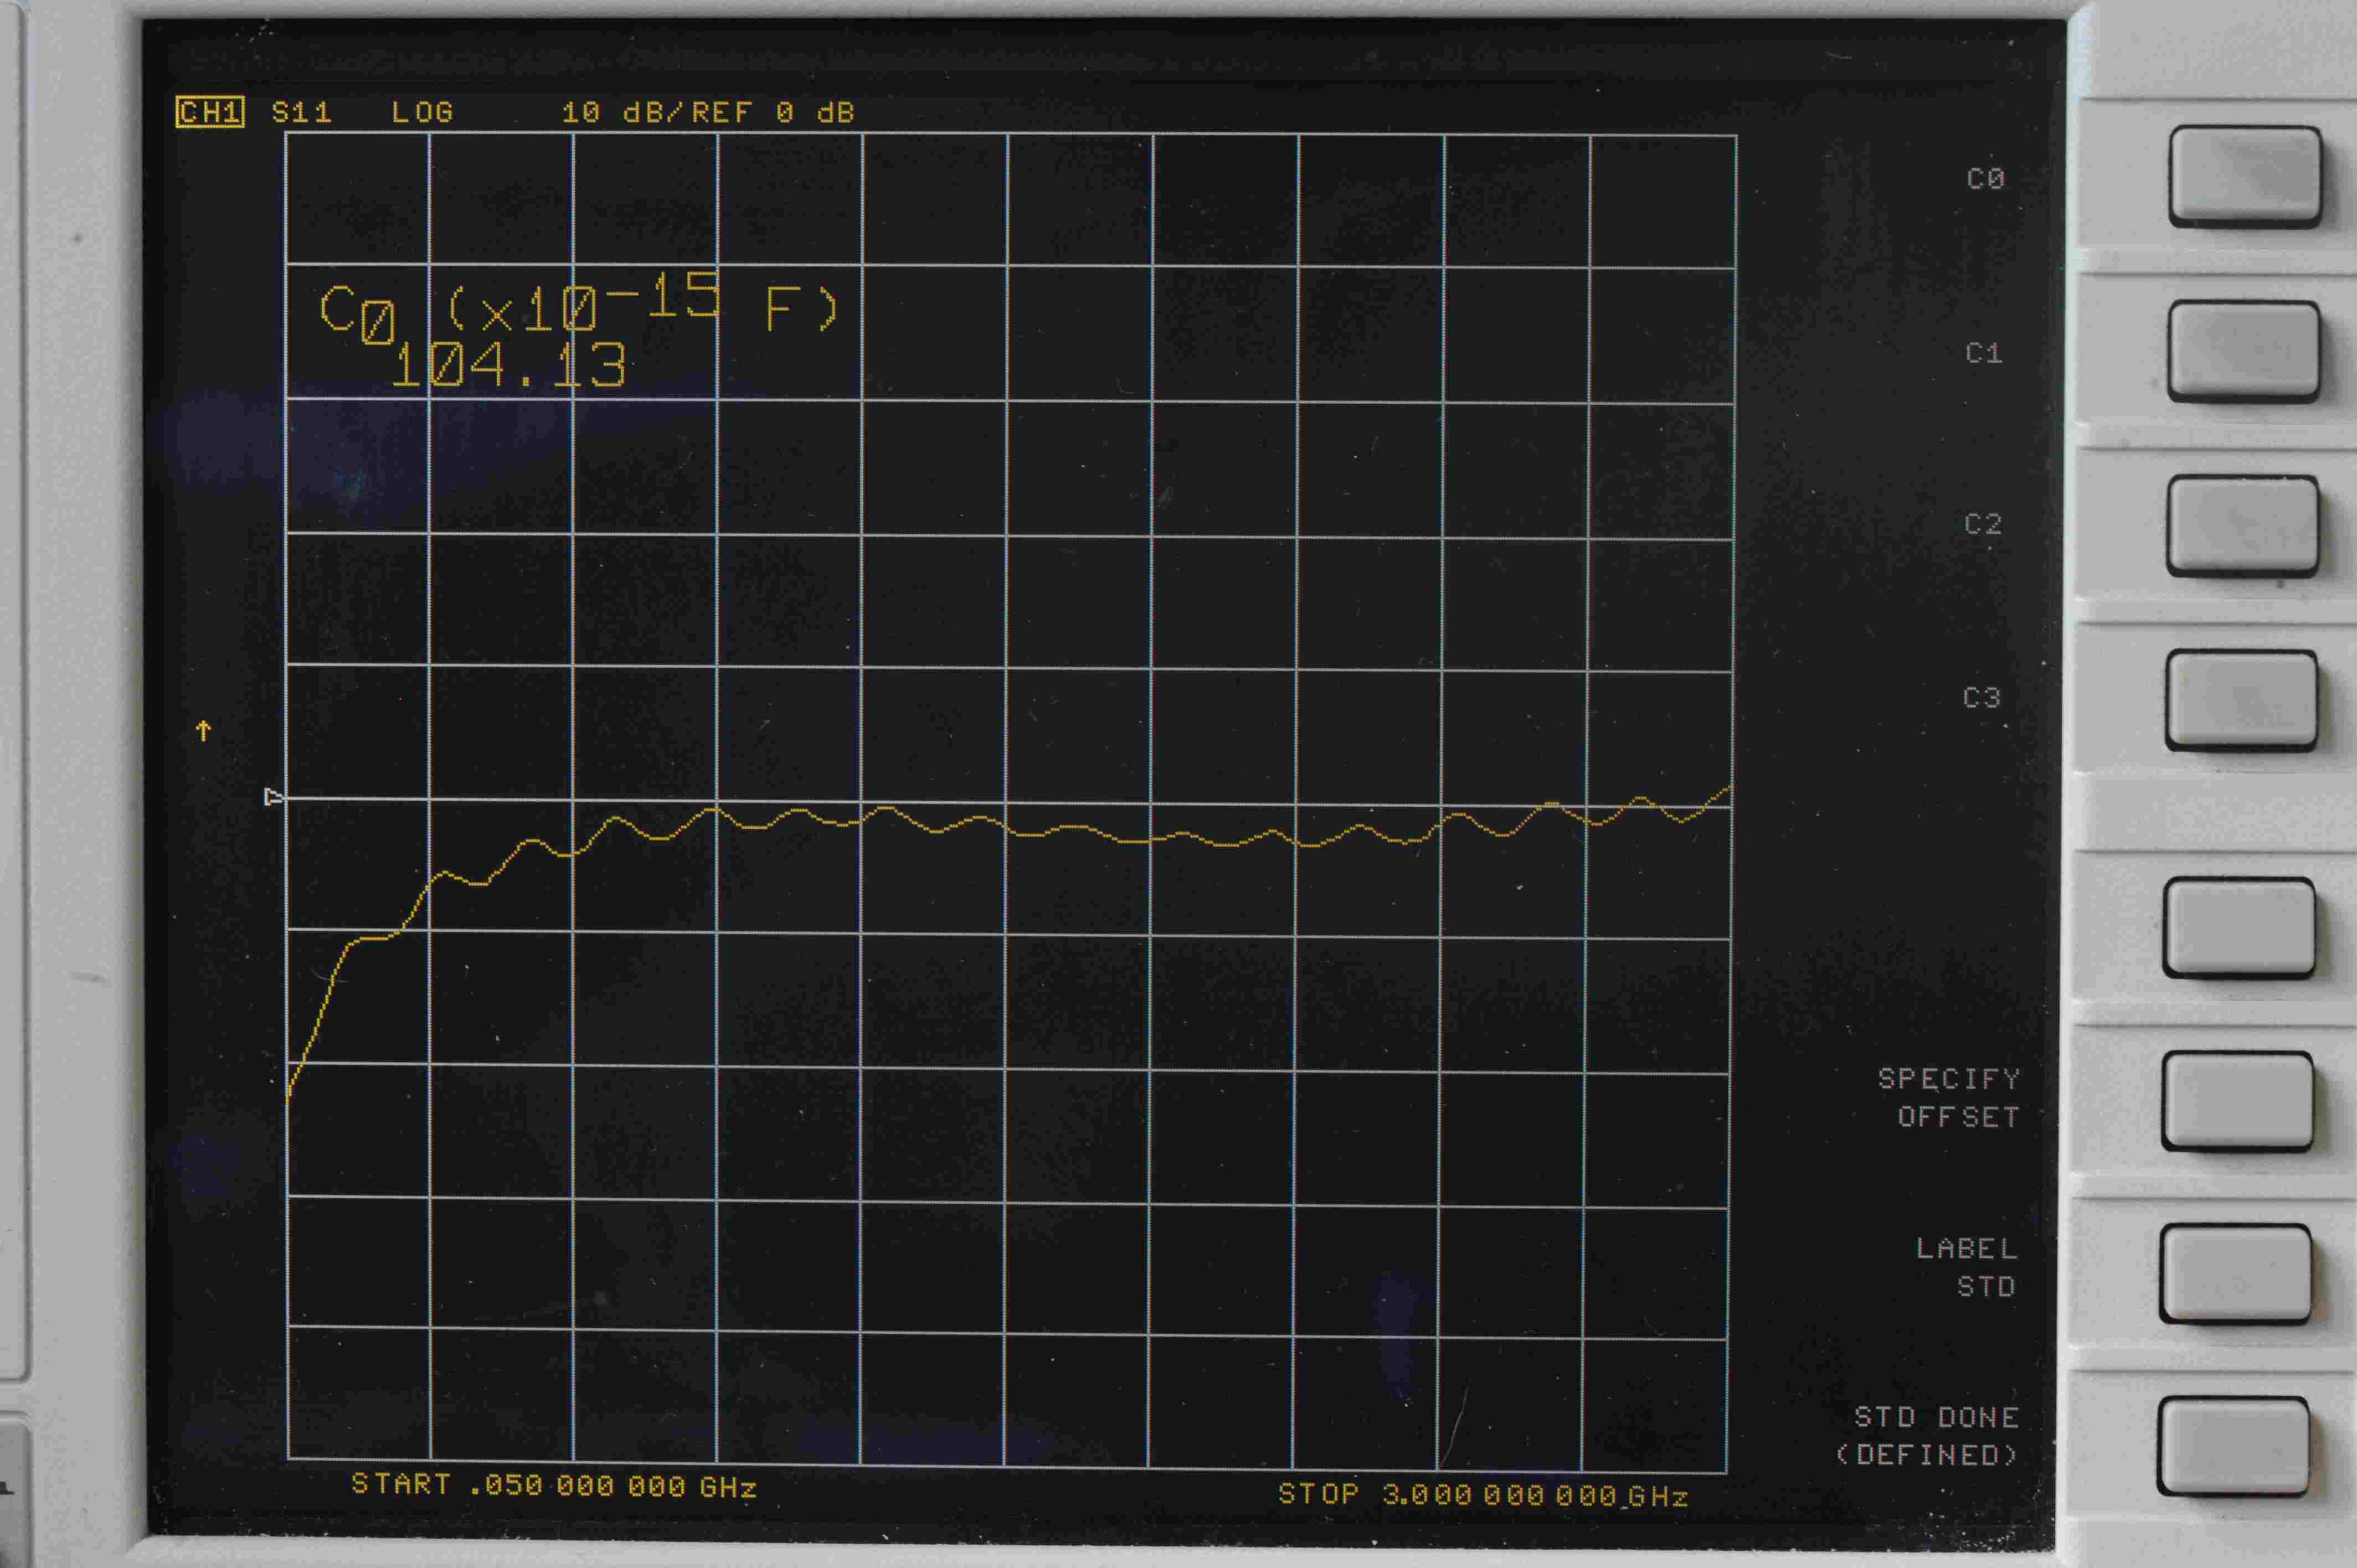 C0 has a value of 104.13 for the Keysight 85054B vector network analyzer calibration kit.